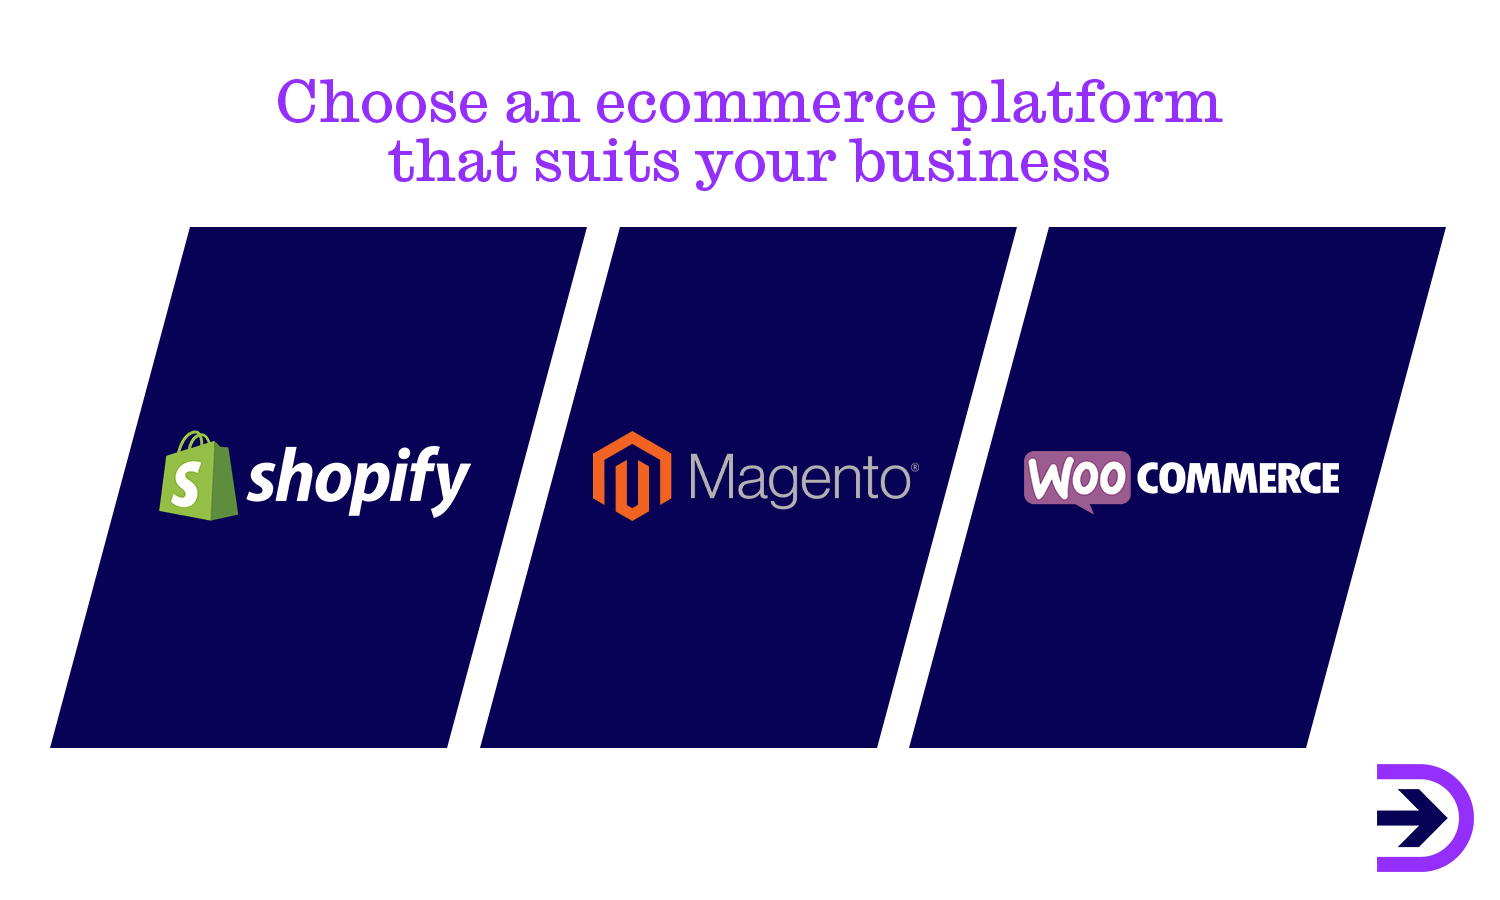 Shopify, Magento and WooCommerce are major ecommerce platforms that can form the backbone of your online business.